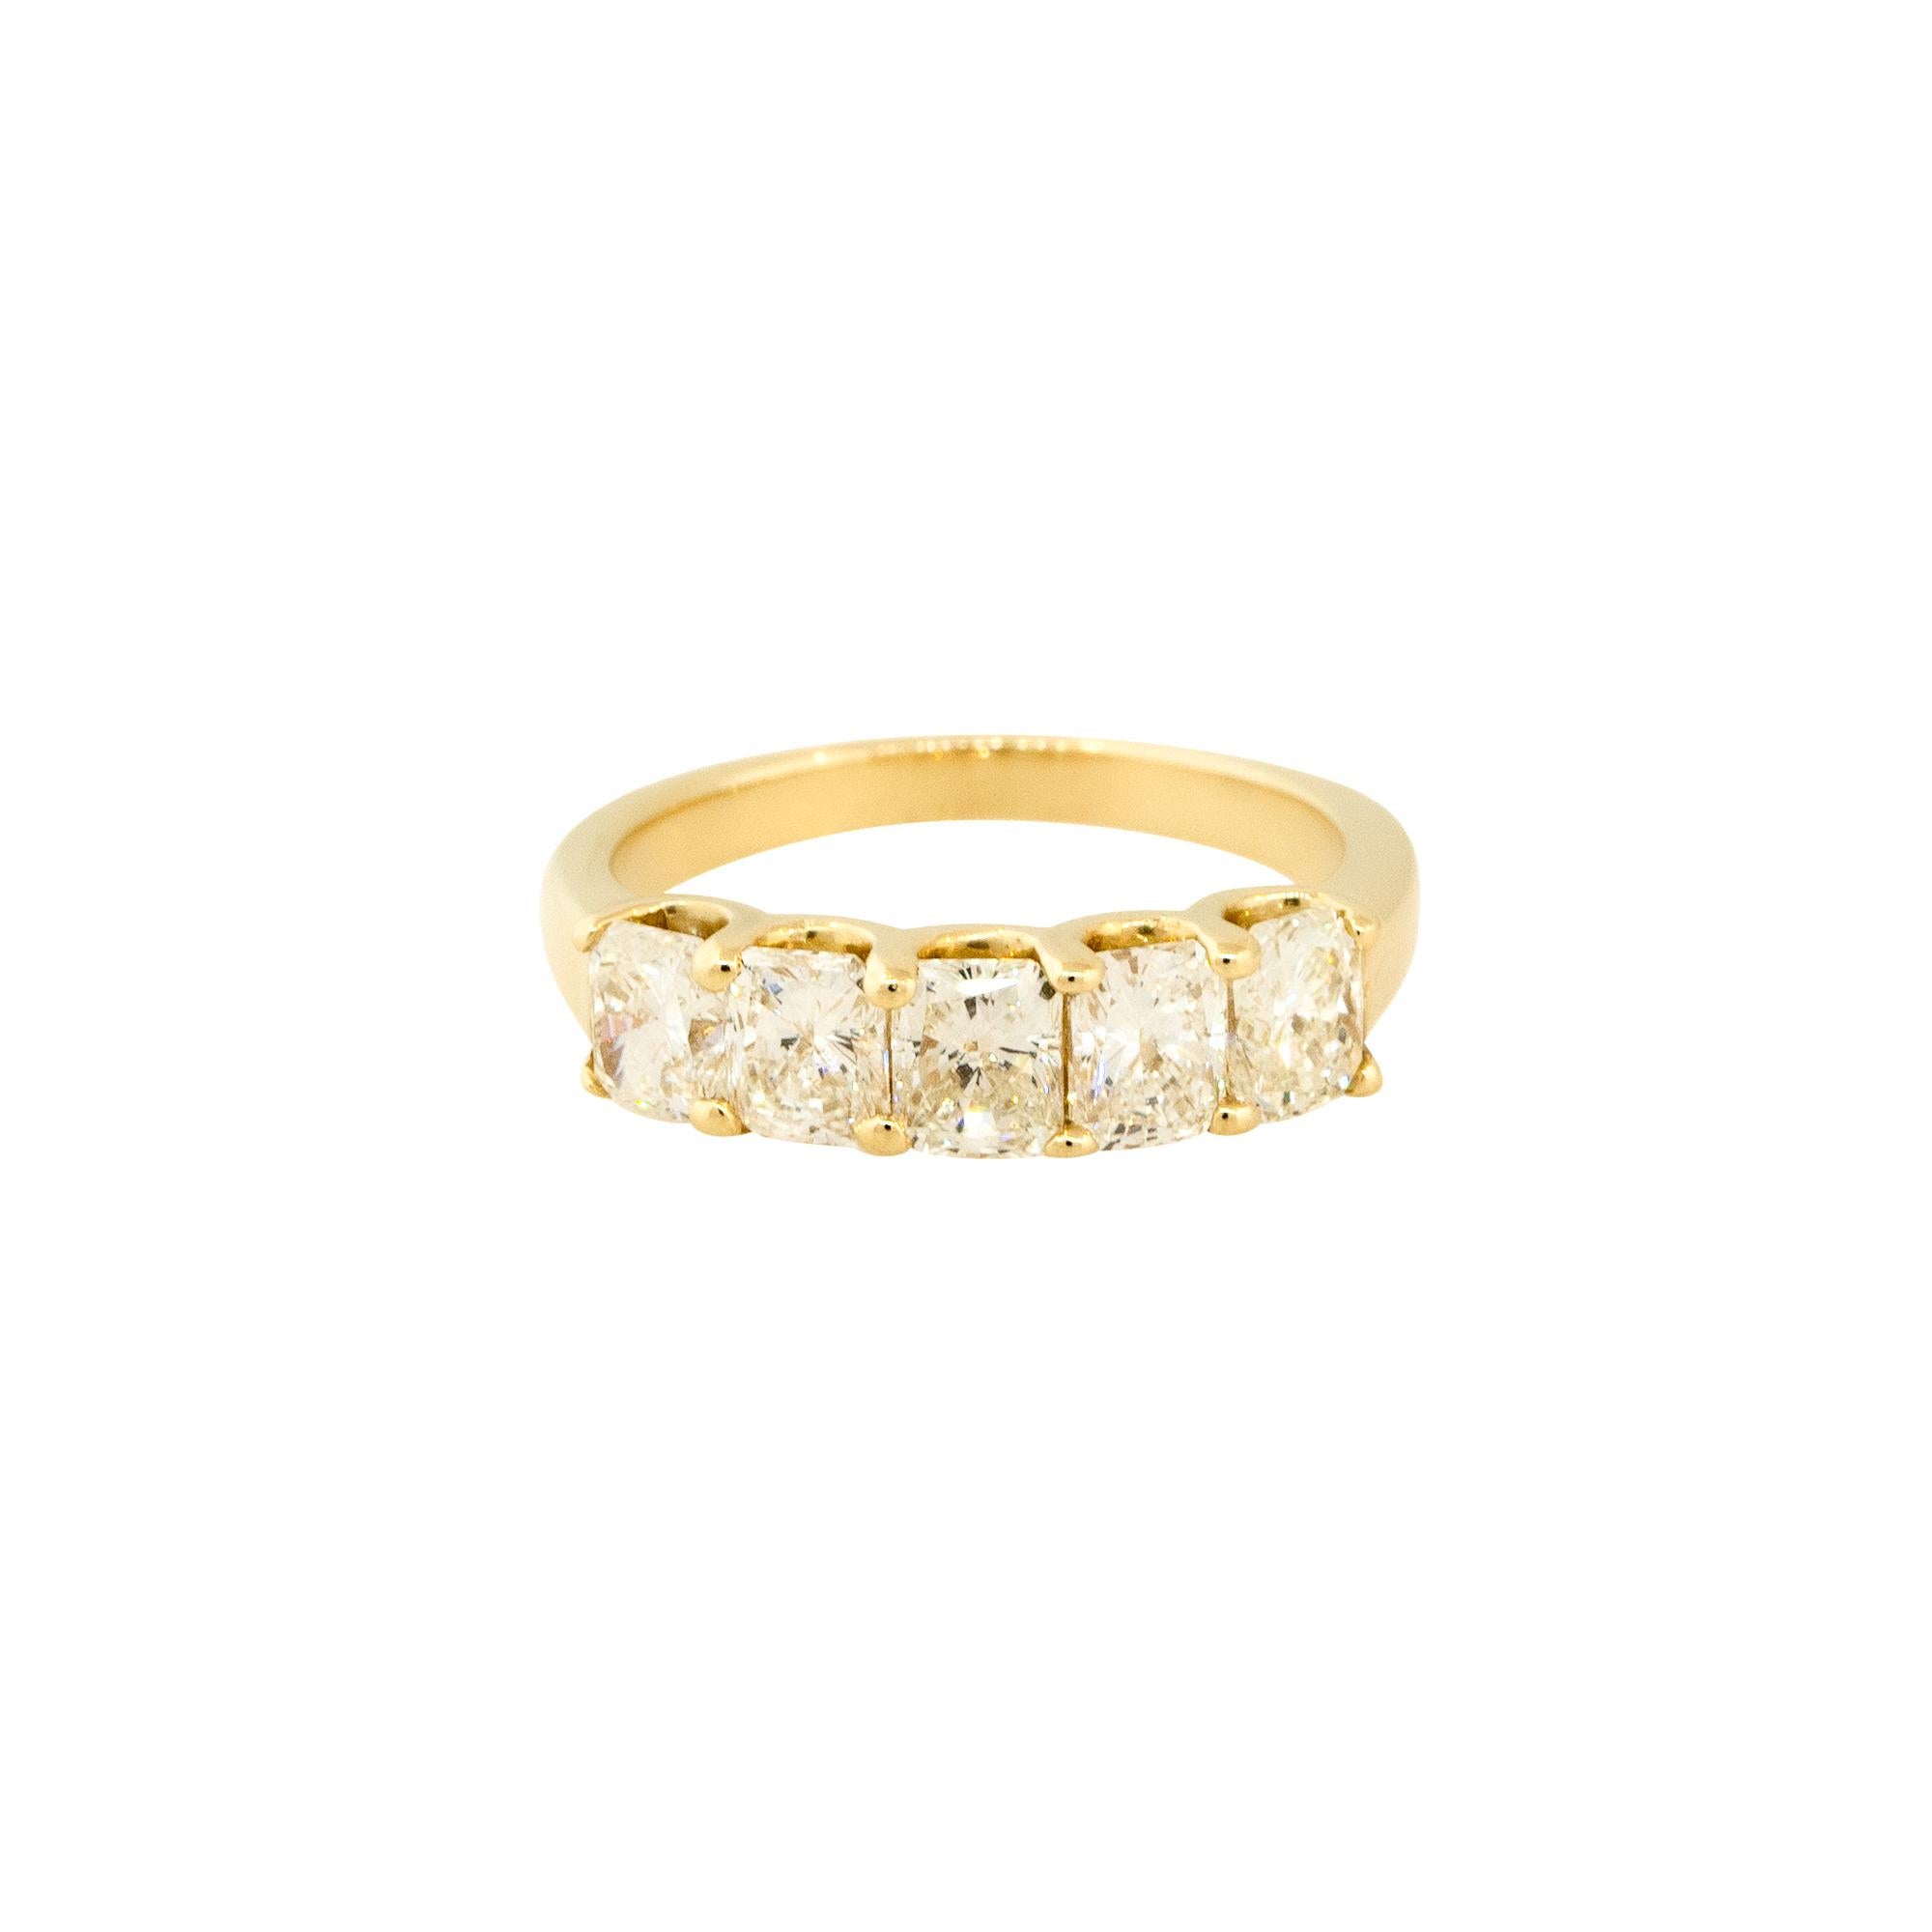 14k Yellow Gold 2.08ctw Radiant Cut 5 Diamond Band

Material: 14k Yellow Gold
Diamond Details: Approximately 2.08ctw of Radiant Cut Diamonds. All Diamonds are prong set and there are 5 Diamonds total. Diamonds are approximately H/I in Color and VS